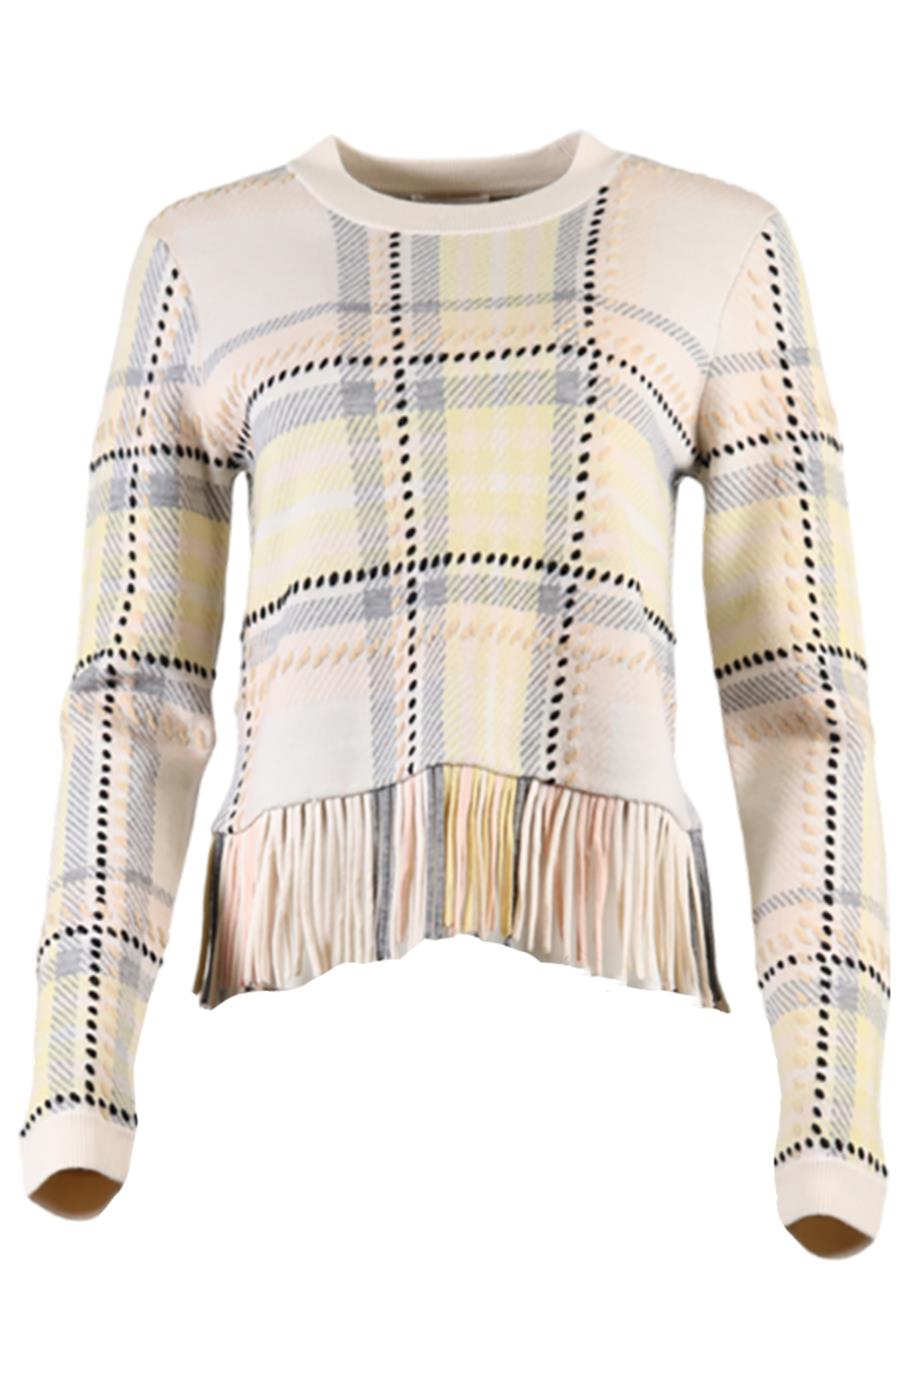 CHLOÉ WOOL AND CASHMERE BLEND SWEATER SMALL